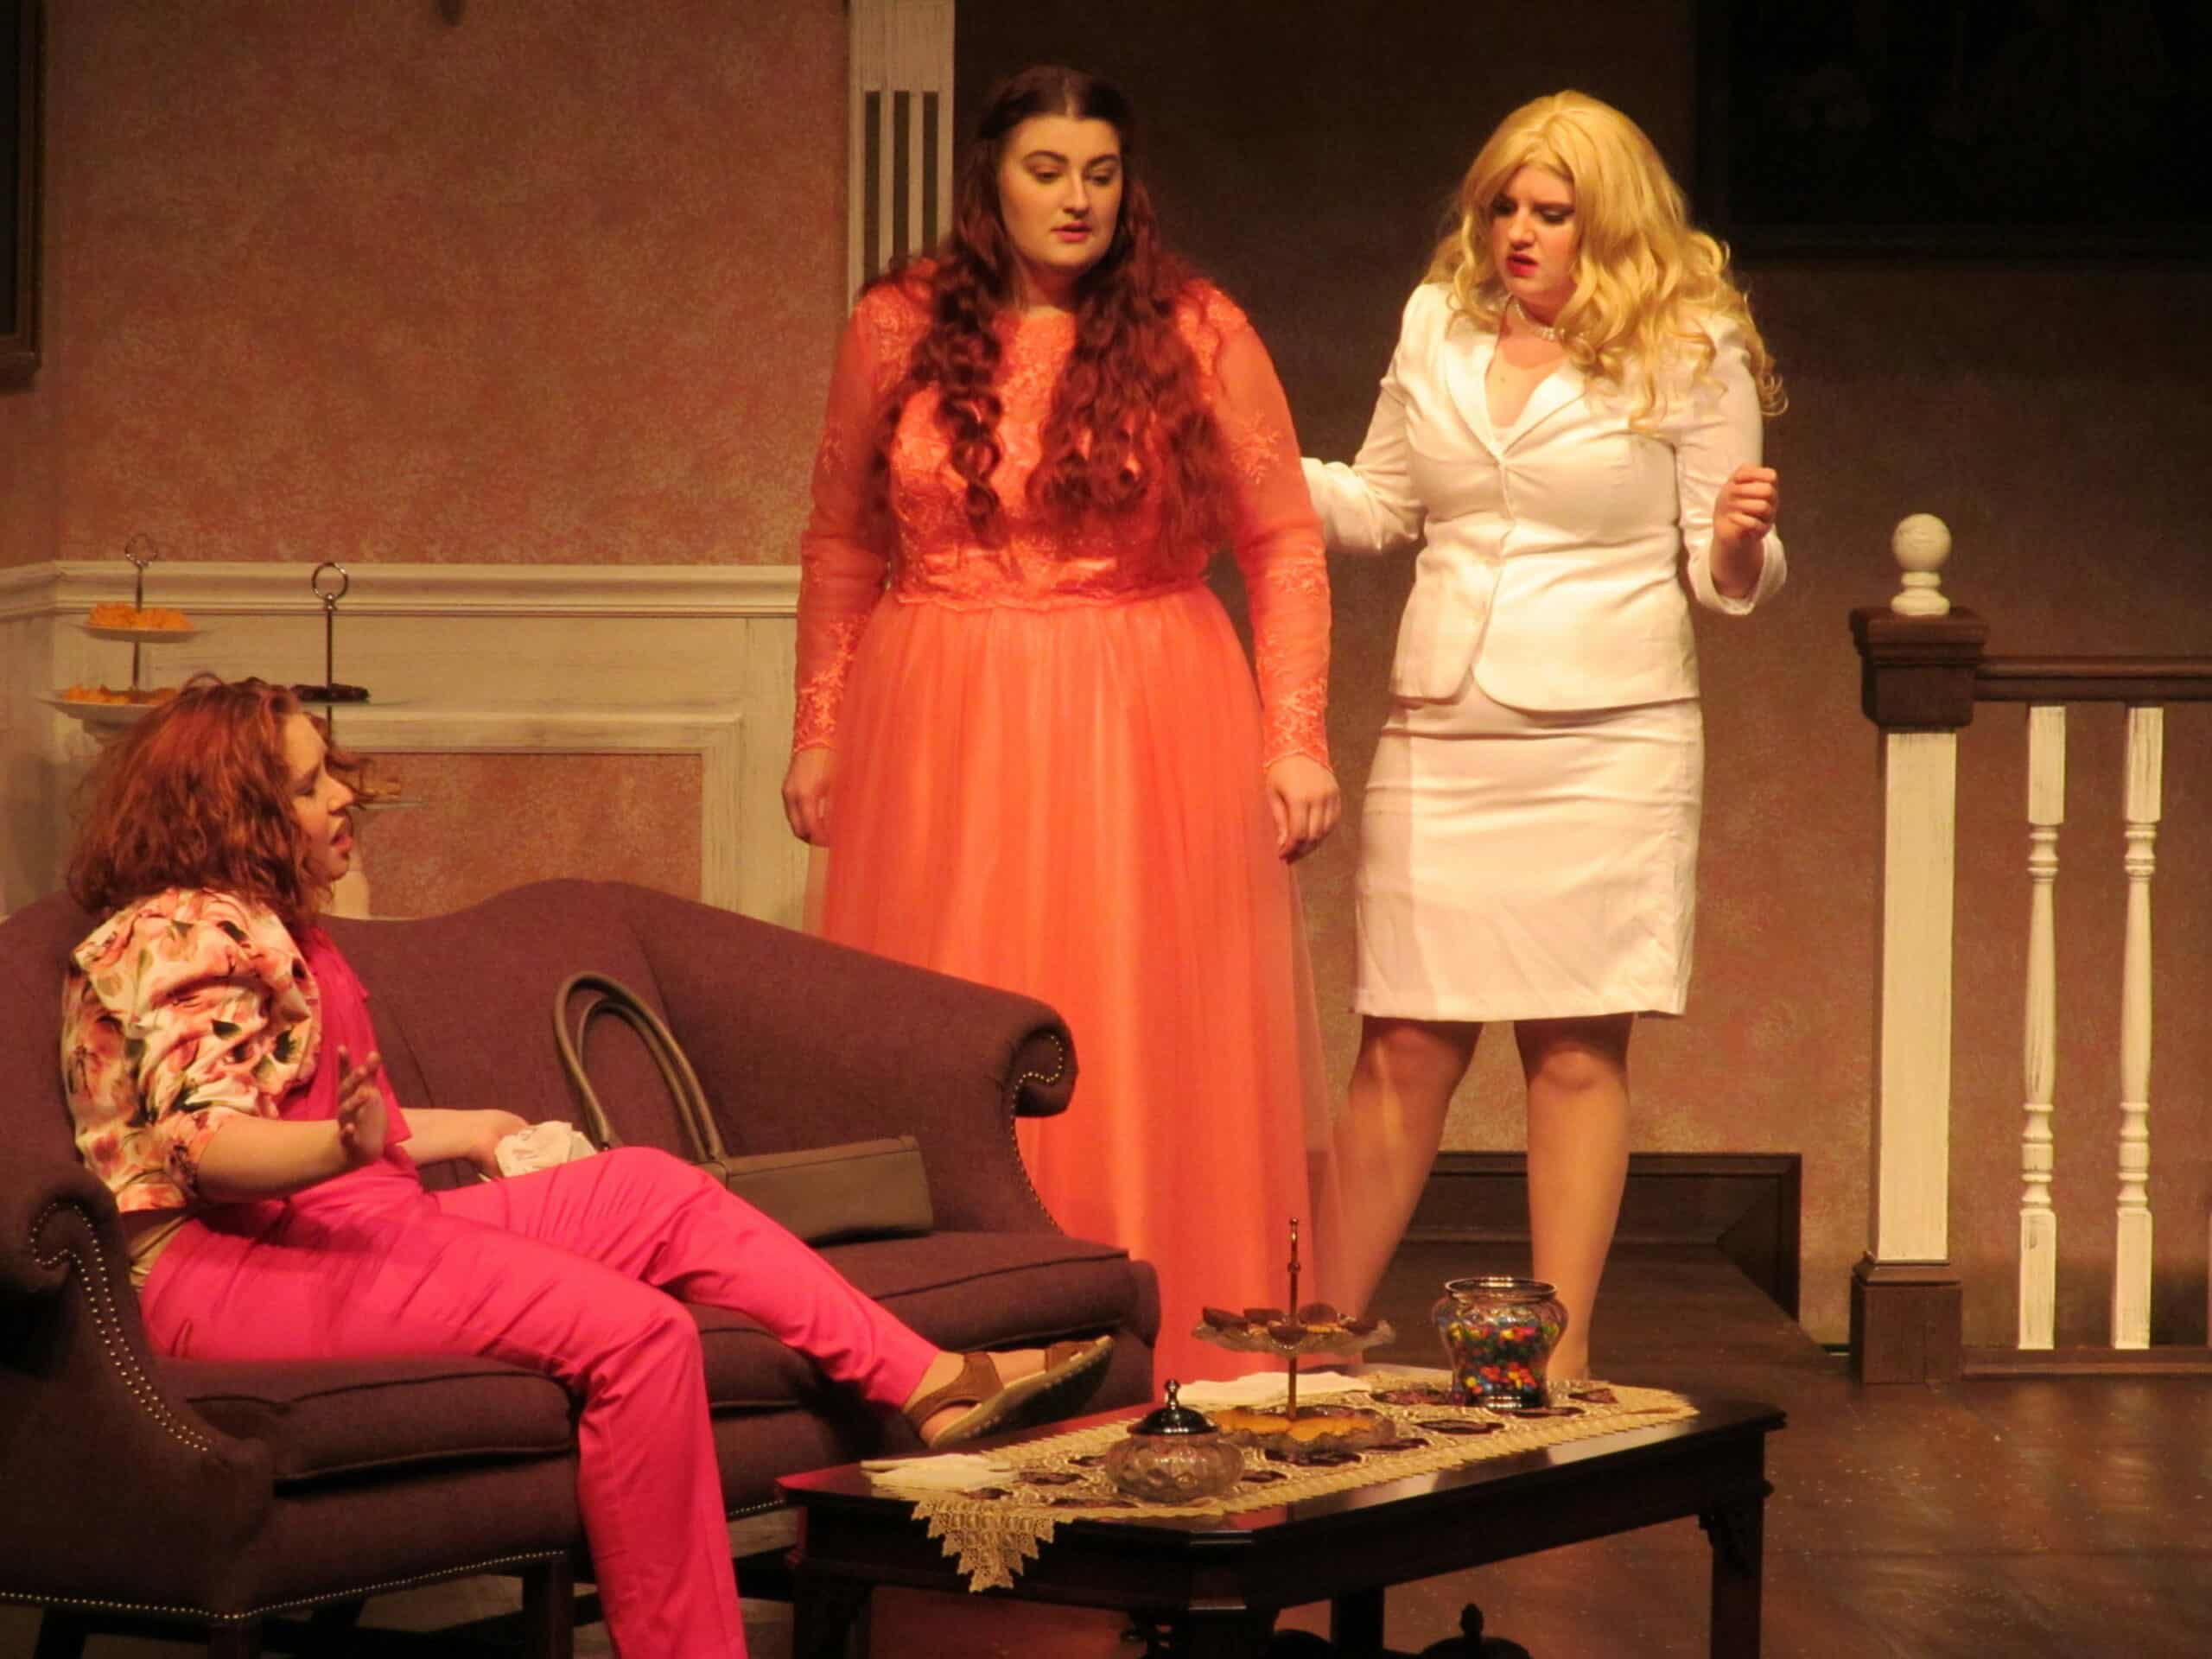 Three women on stage performing Bridesmaids